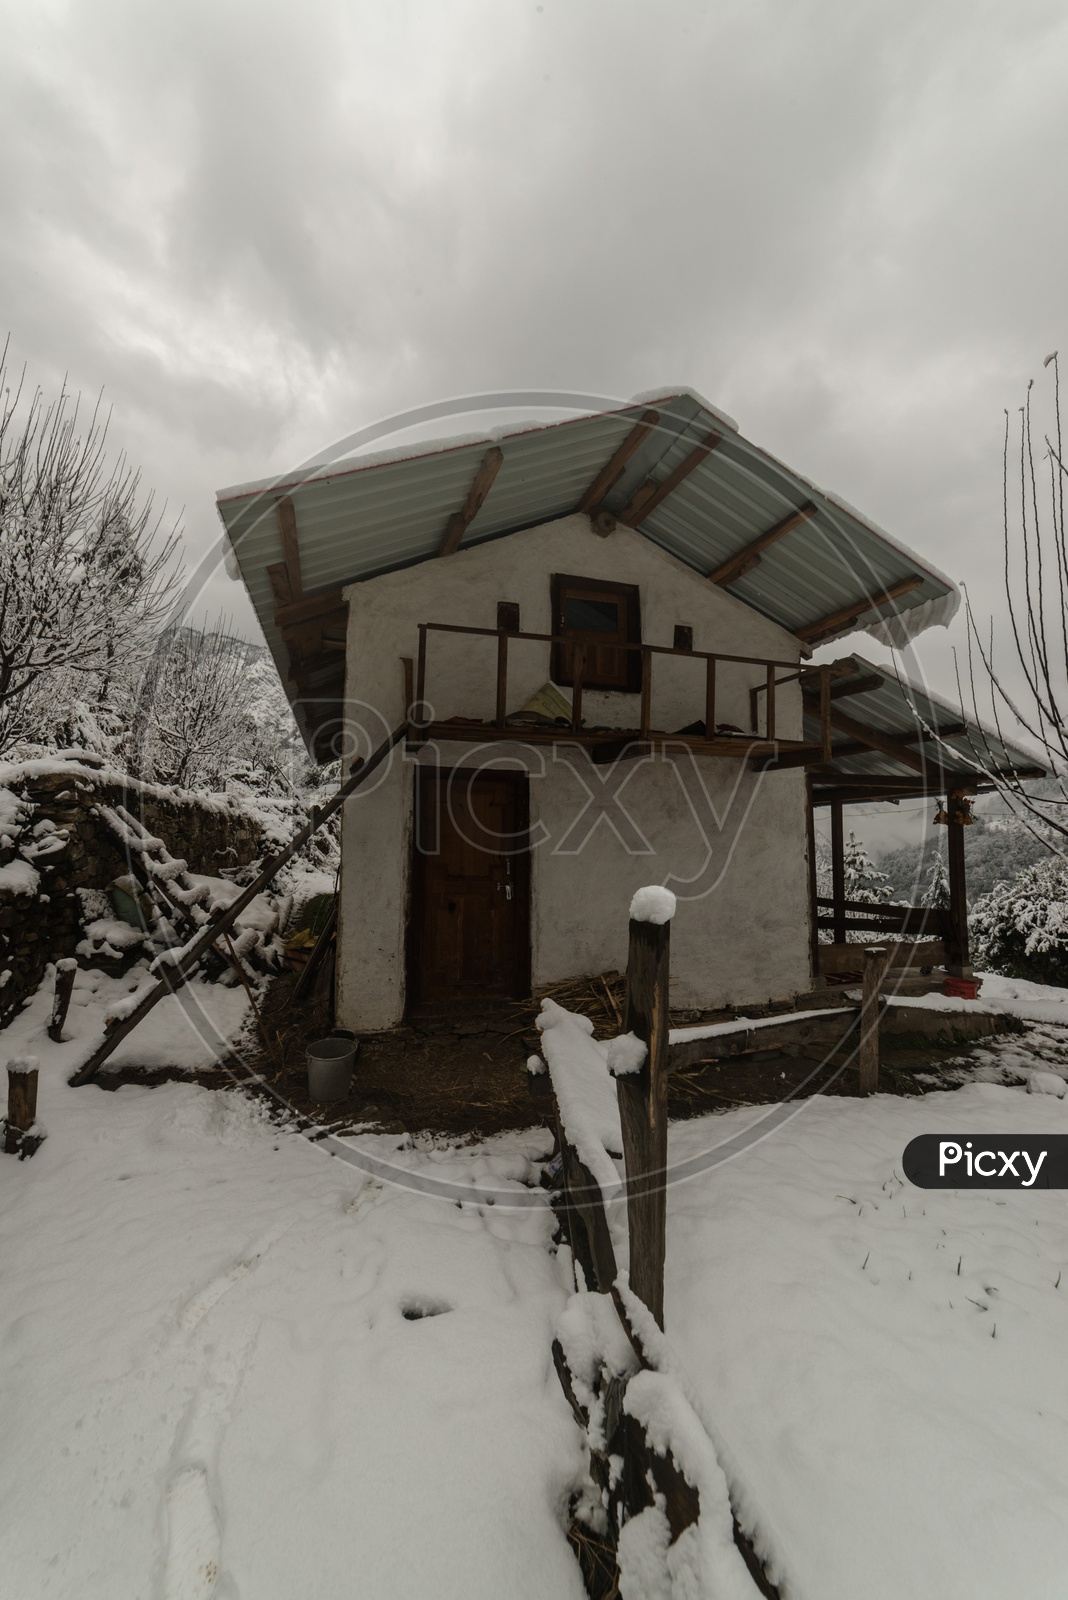 Snow covered wooden house in himalayas in winters - India